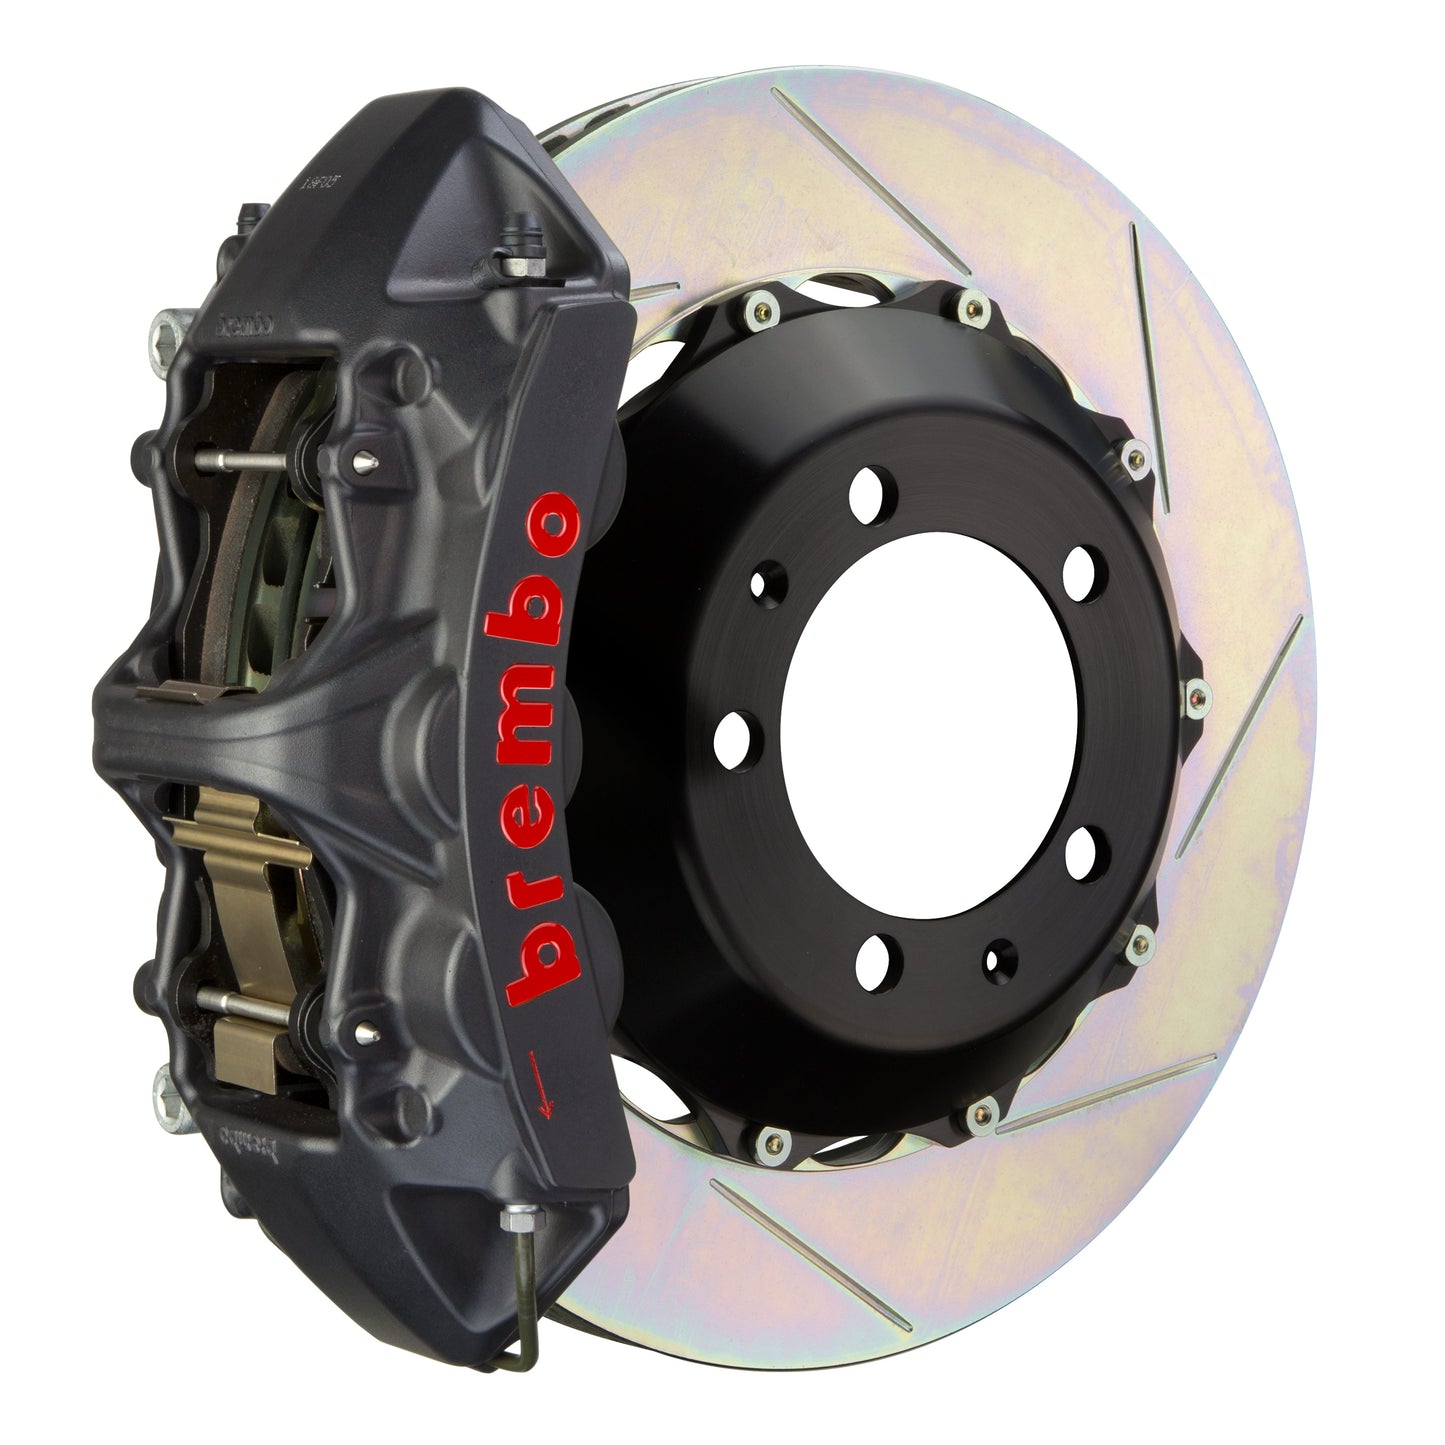 Front Brembo Gran Turismo Braking Upgrade Kit (1M19013AS) GT / S6 Caliper with 6-Pistons & 2-piece 380x32 Disc